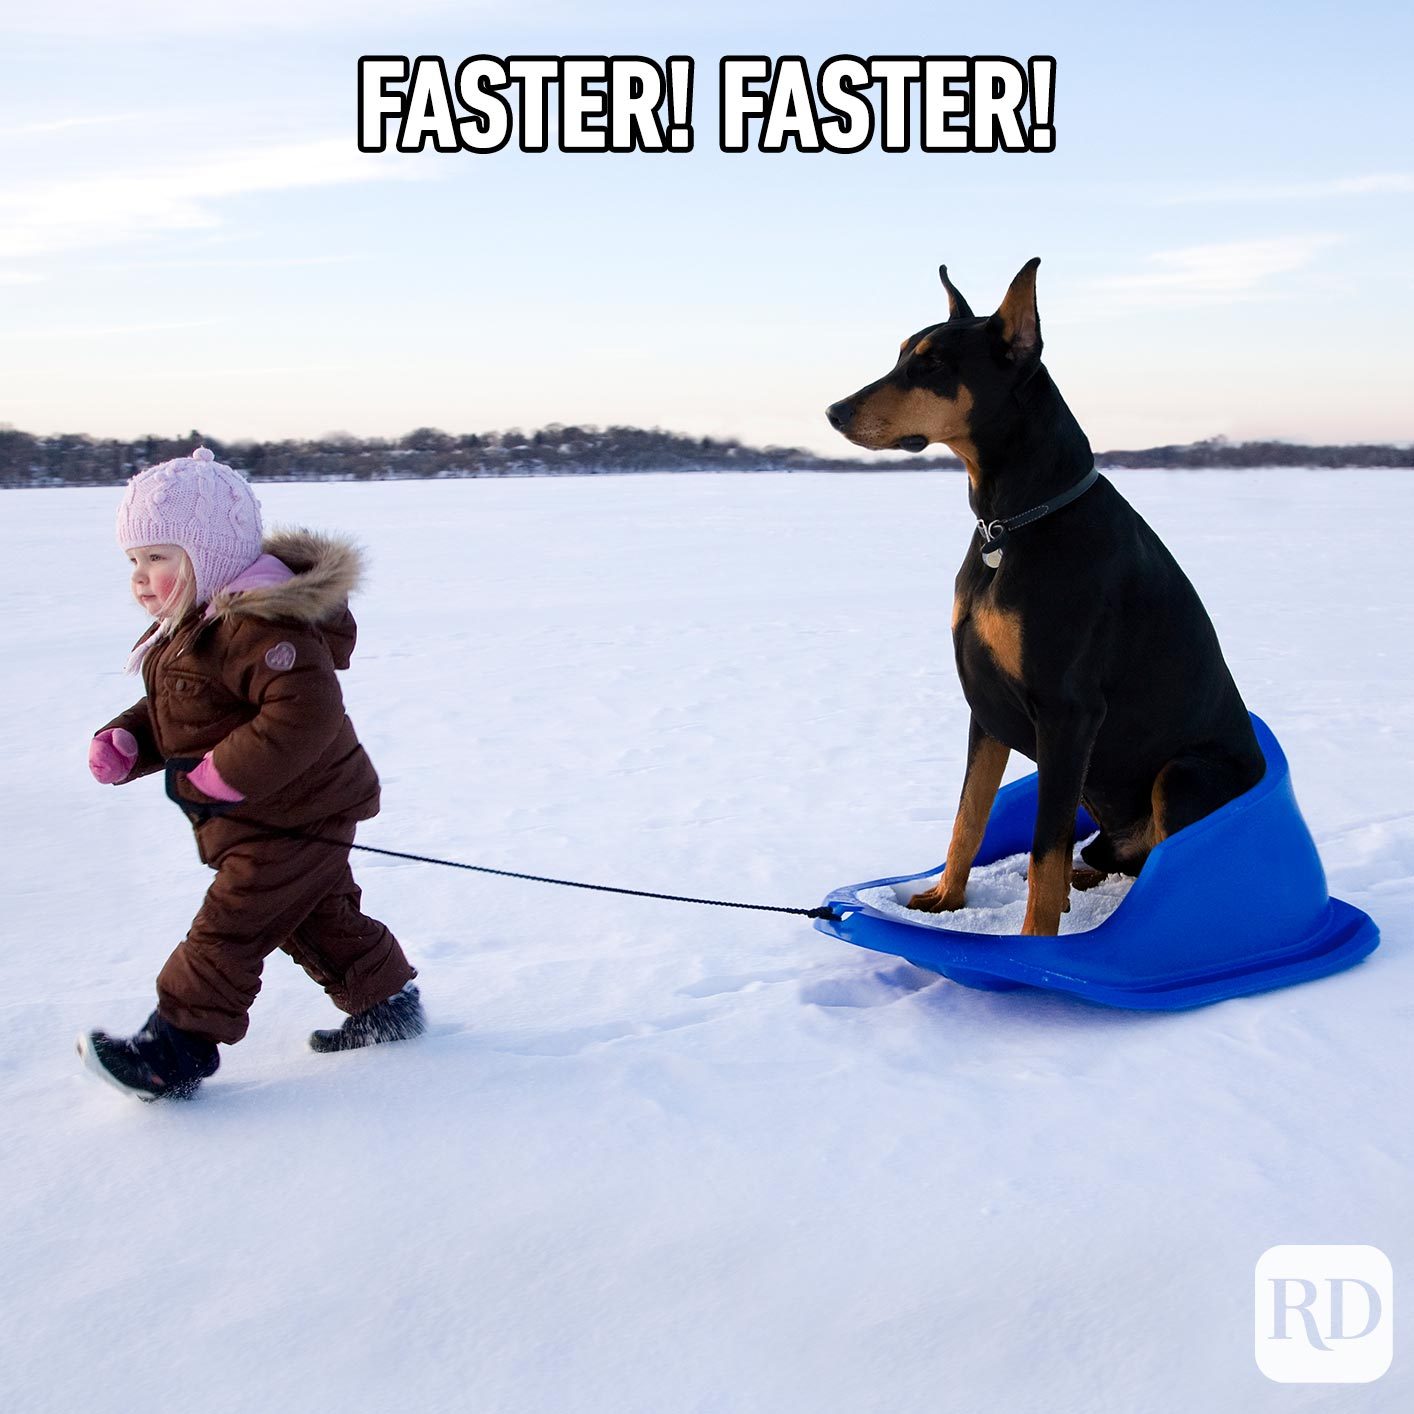 Little girl pulling dog on a sled. Meme text: Faster! Faster!